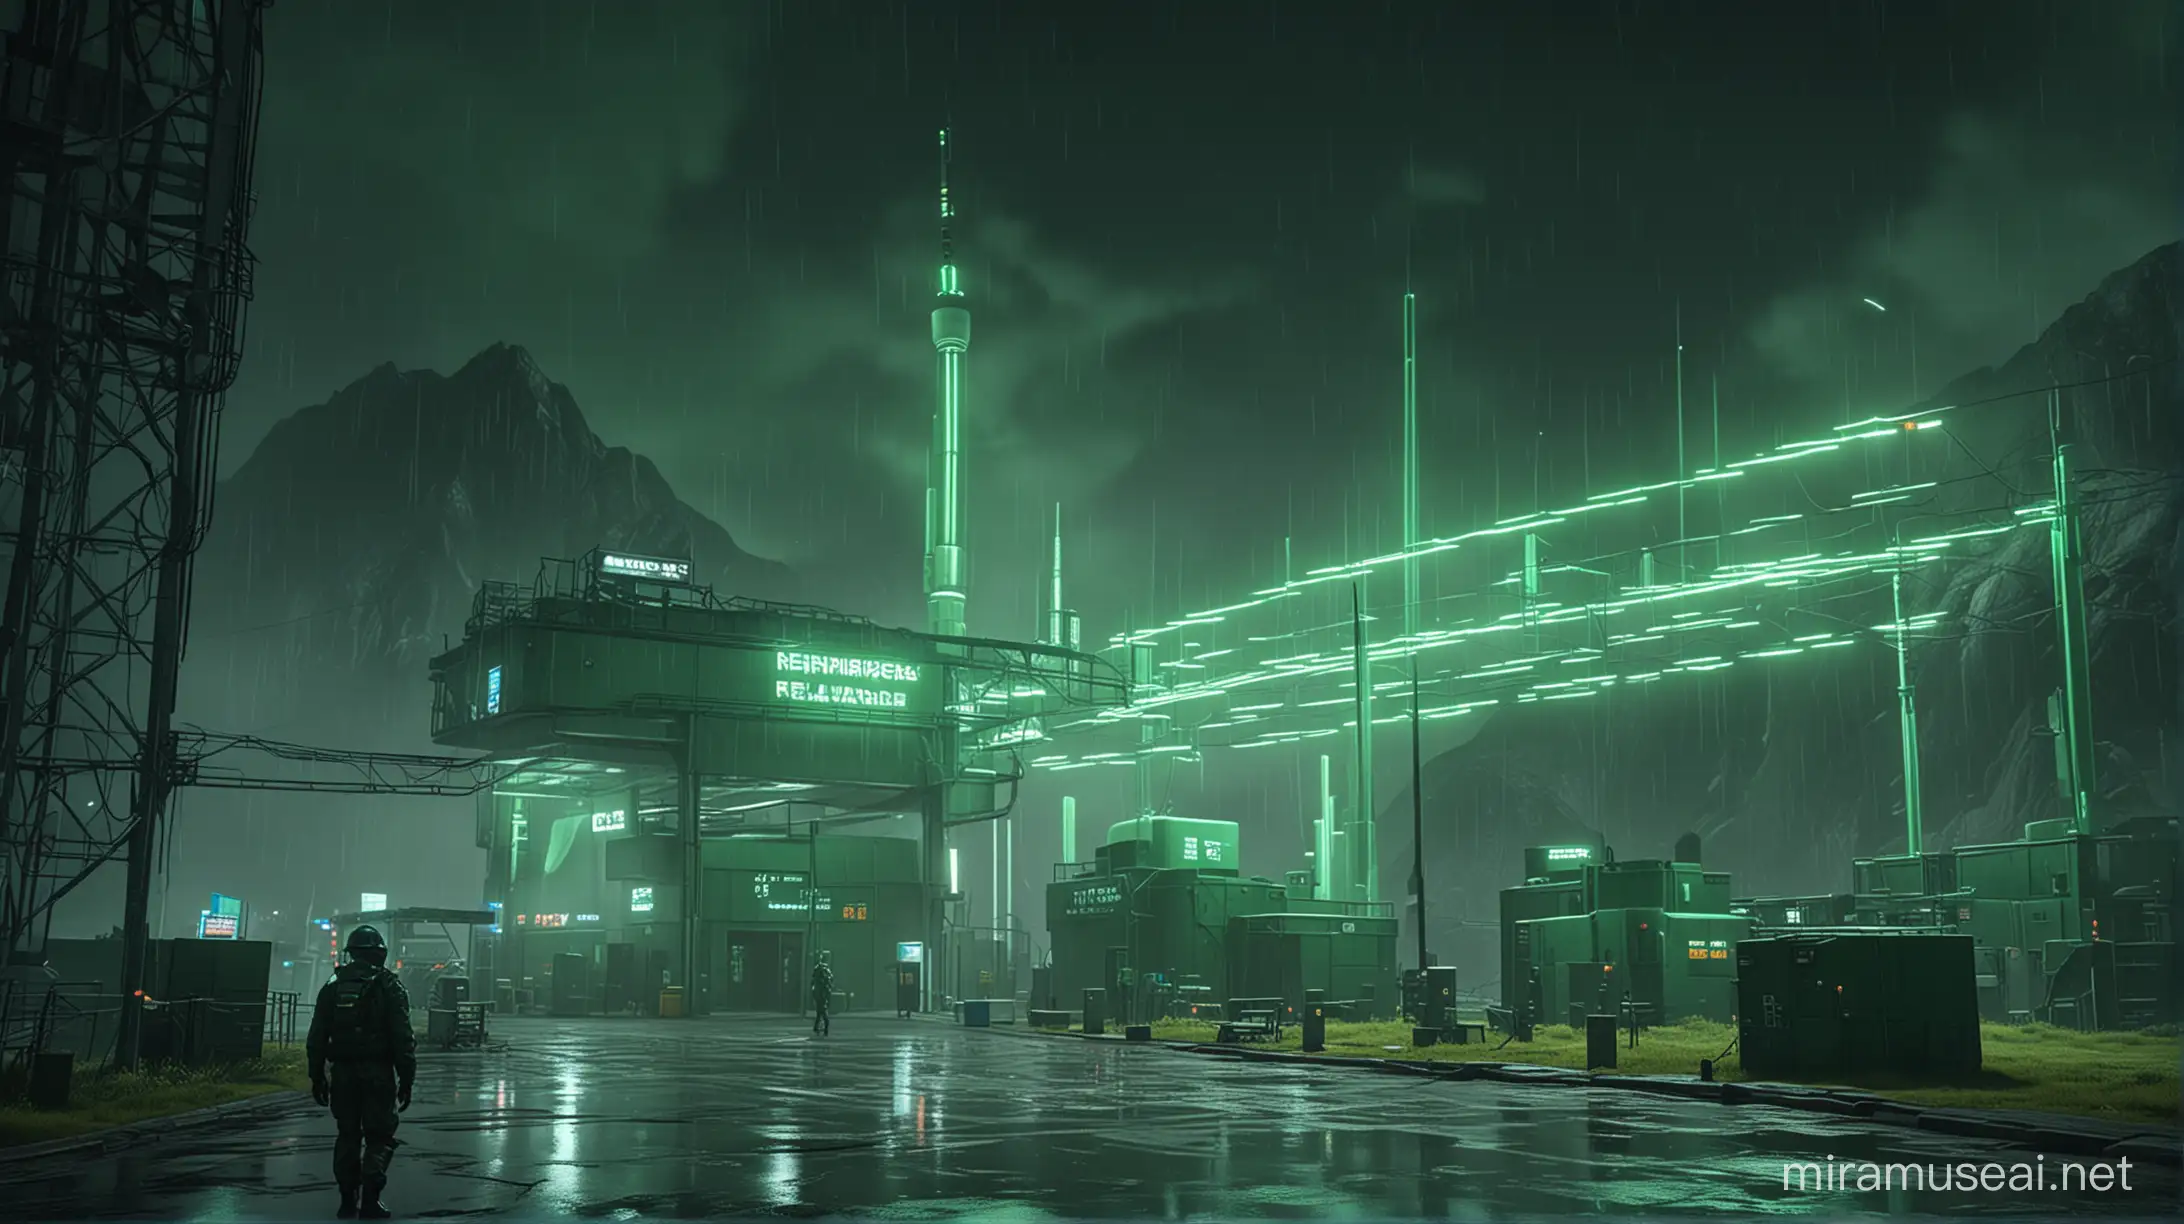 Realistic research centers buildings with one worker around it, green neon and huge neon lights inside the part, its color shadow on the floor, Rainy weather, staff in dark green uniforms and helmets, Atmospheric and cinematic, The huge structures, A dark green smoke rose from the research centers environment and spread in the air, The image space is outside the realistic research center.
with huge satellite antennas,
A huge cubic green neon object,
in the Realistic mountains.
atmospheric and cinematic.
All overall dark green image theme.
Very big lights and lots of green neon lights.
The neon lights in the image should be very bright throughout the image.
The neon lights in the picture should be very bright in the dark
The neon lights in the picture should be very bright.
Very large and bright neon lamps in the structure.
Shades of green throughout the image.
3D.
Several large advanced and strange buildings nearby.